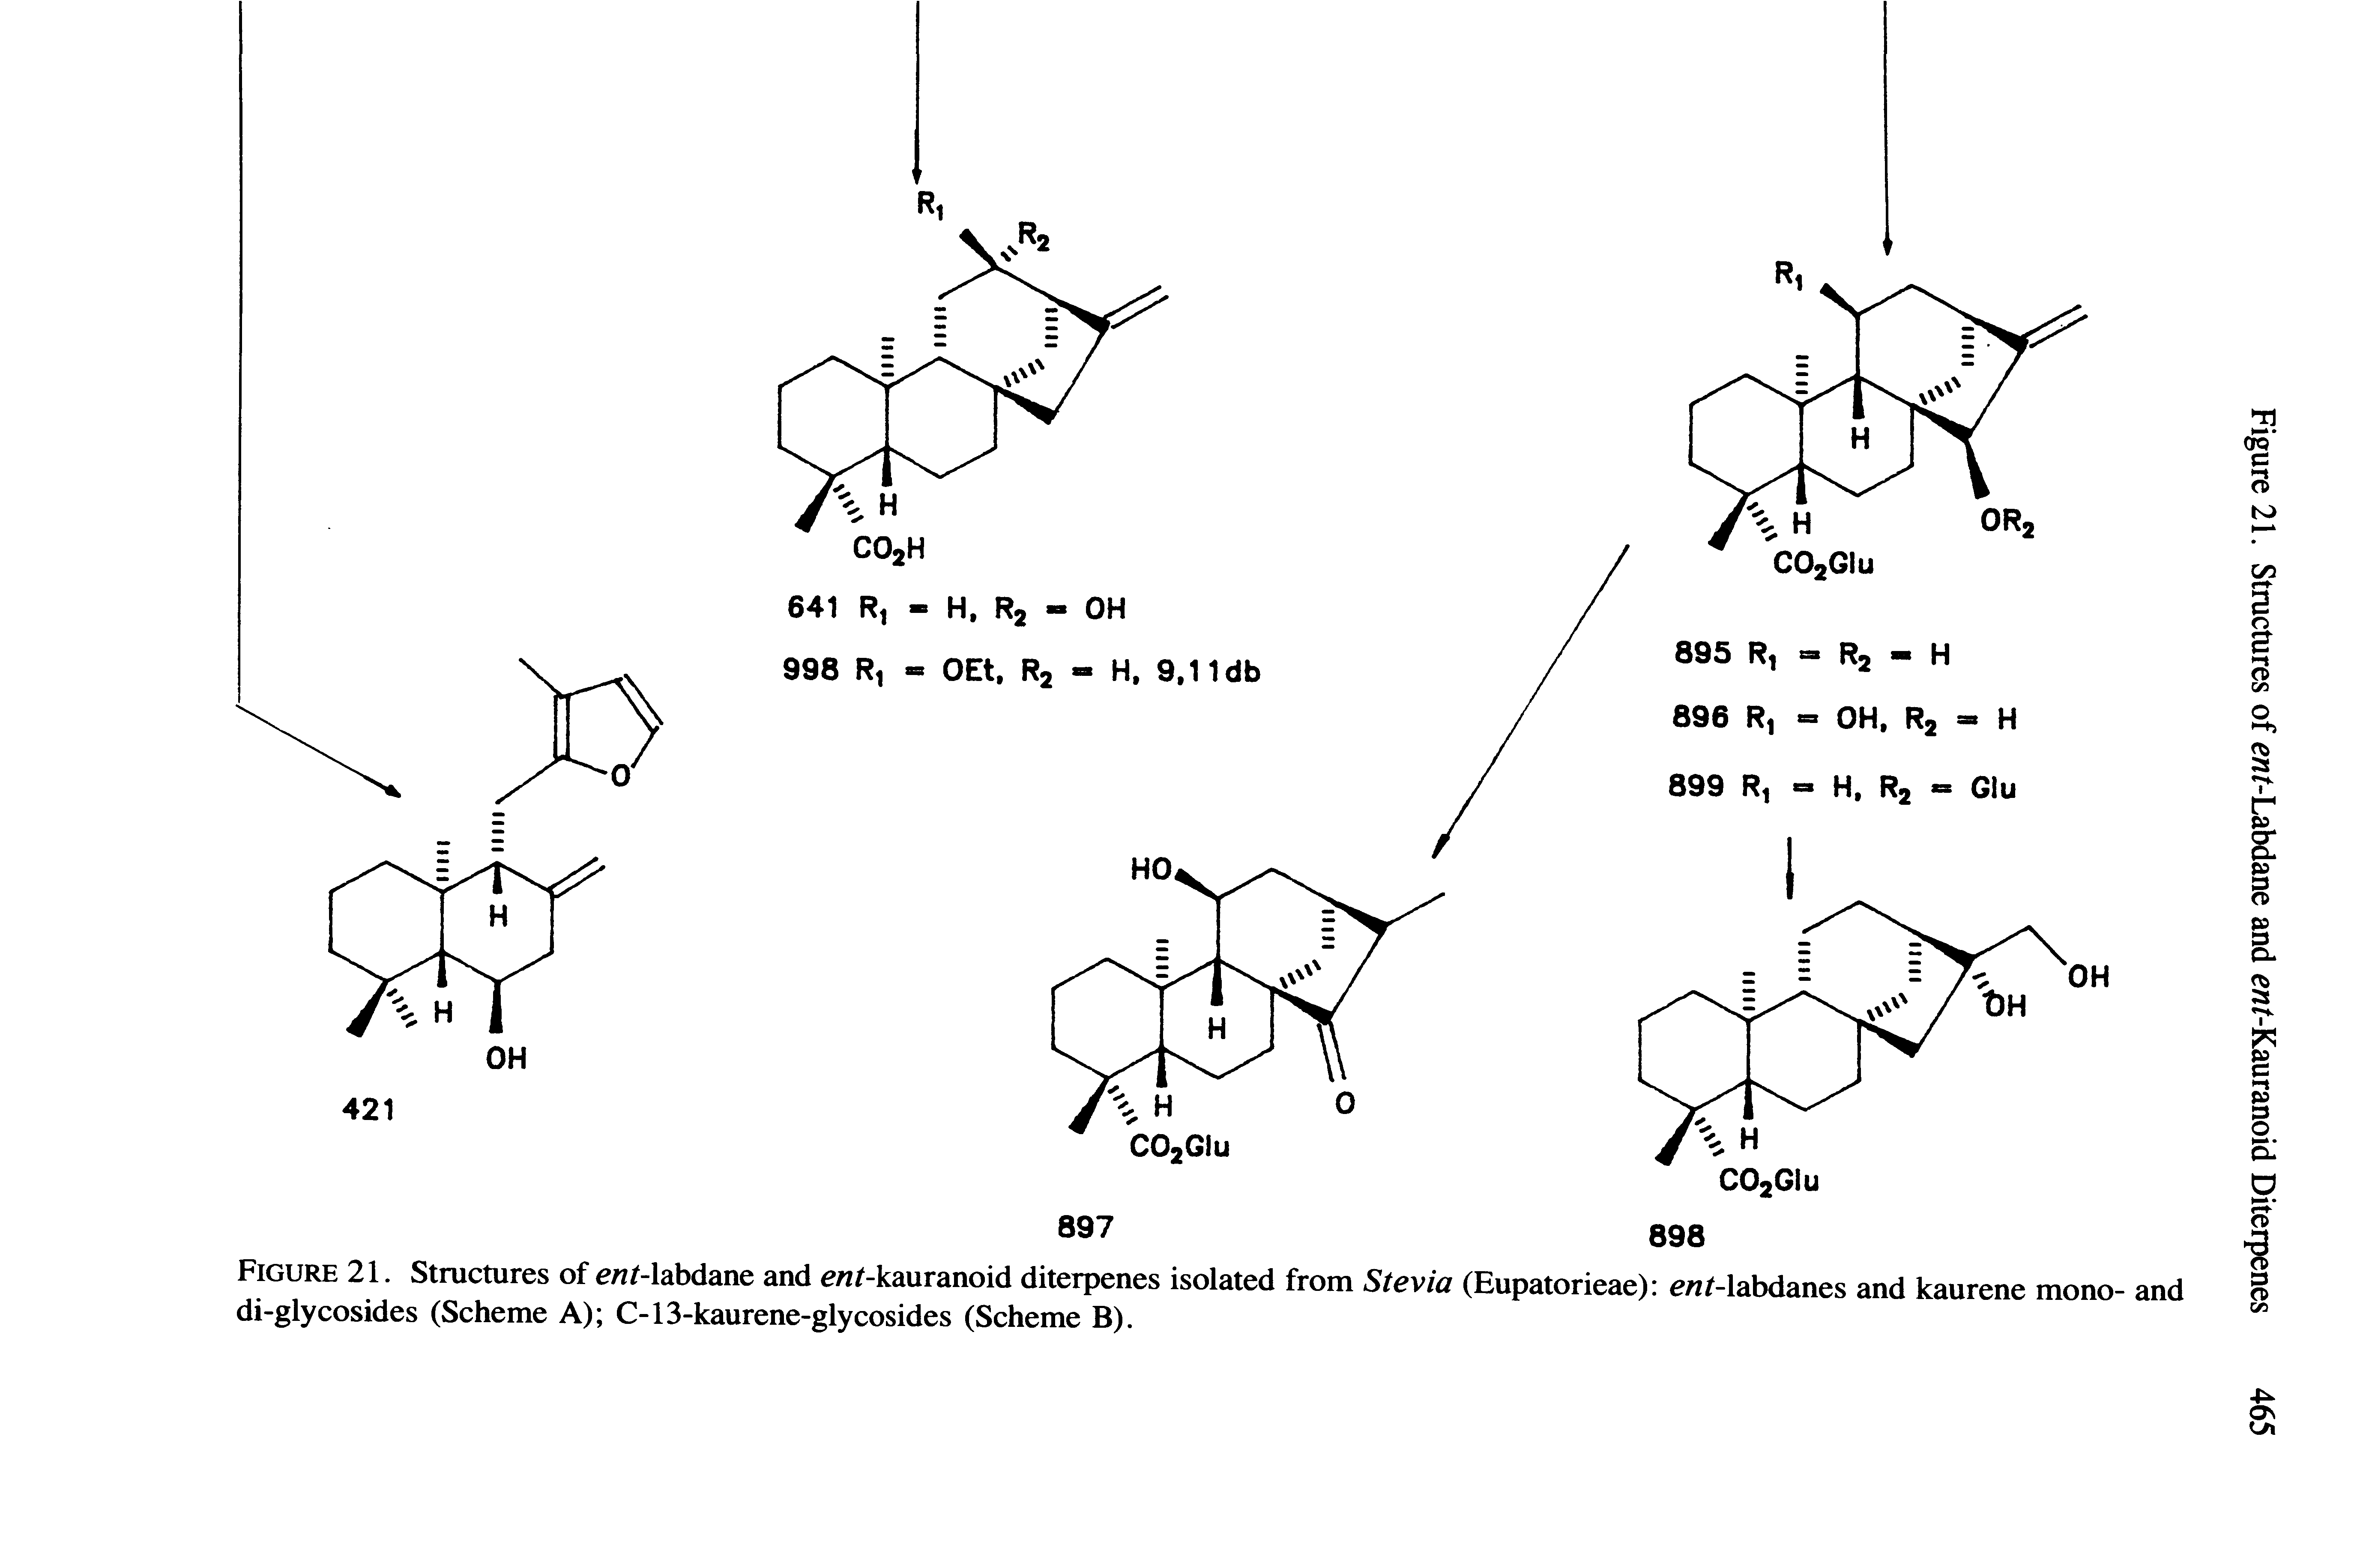 Figure 21. Structures of cwMabdane and c /-kauranoid diterpenes isolated from Stevia (Eupatorieae) e -labdanes and kaurene mono- and di-glycosides (Scheme A) C-13-kaurene-glycosides (Scheme B).